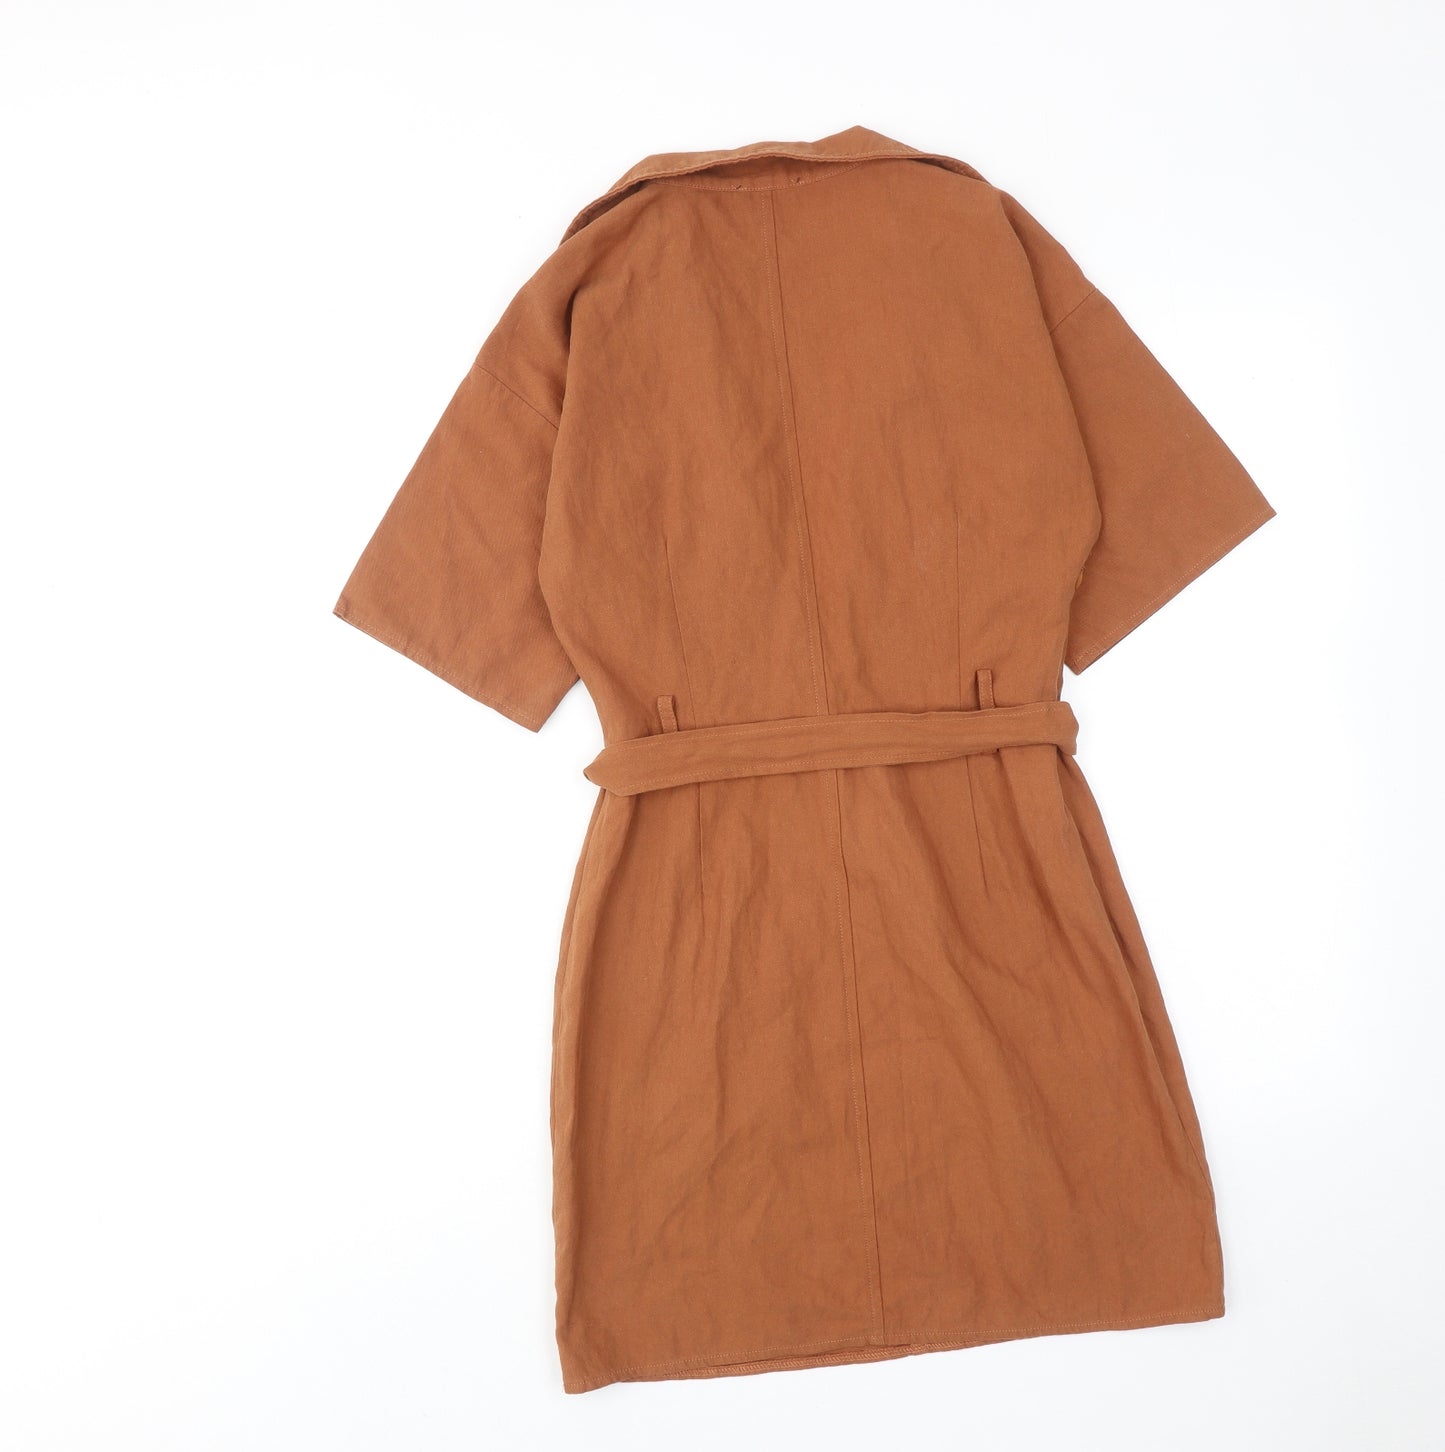 PRETTYLITTLETHING Womens Brown Cotton Shirt Dress Size 10 Collared Pullover